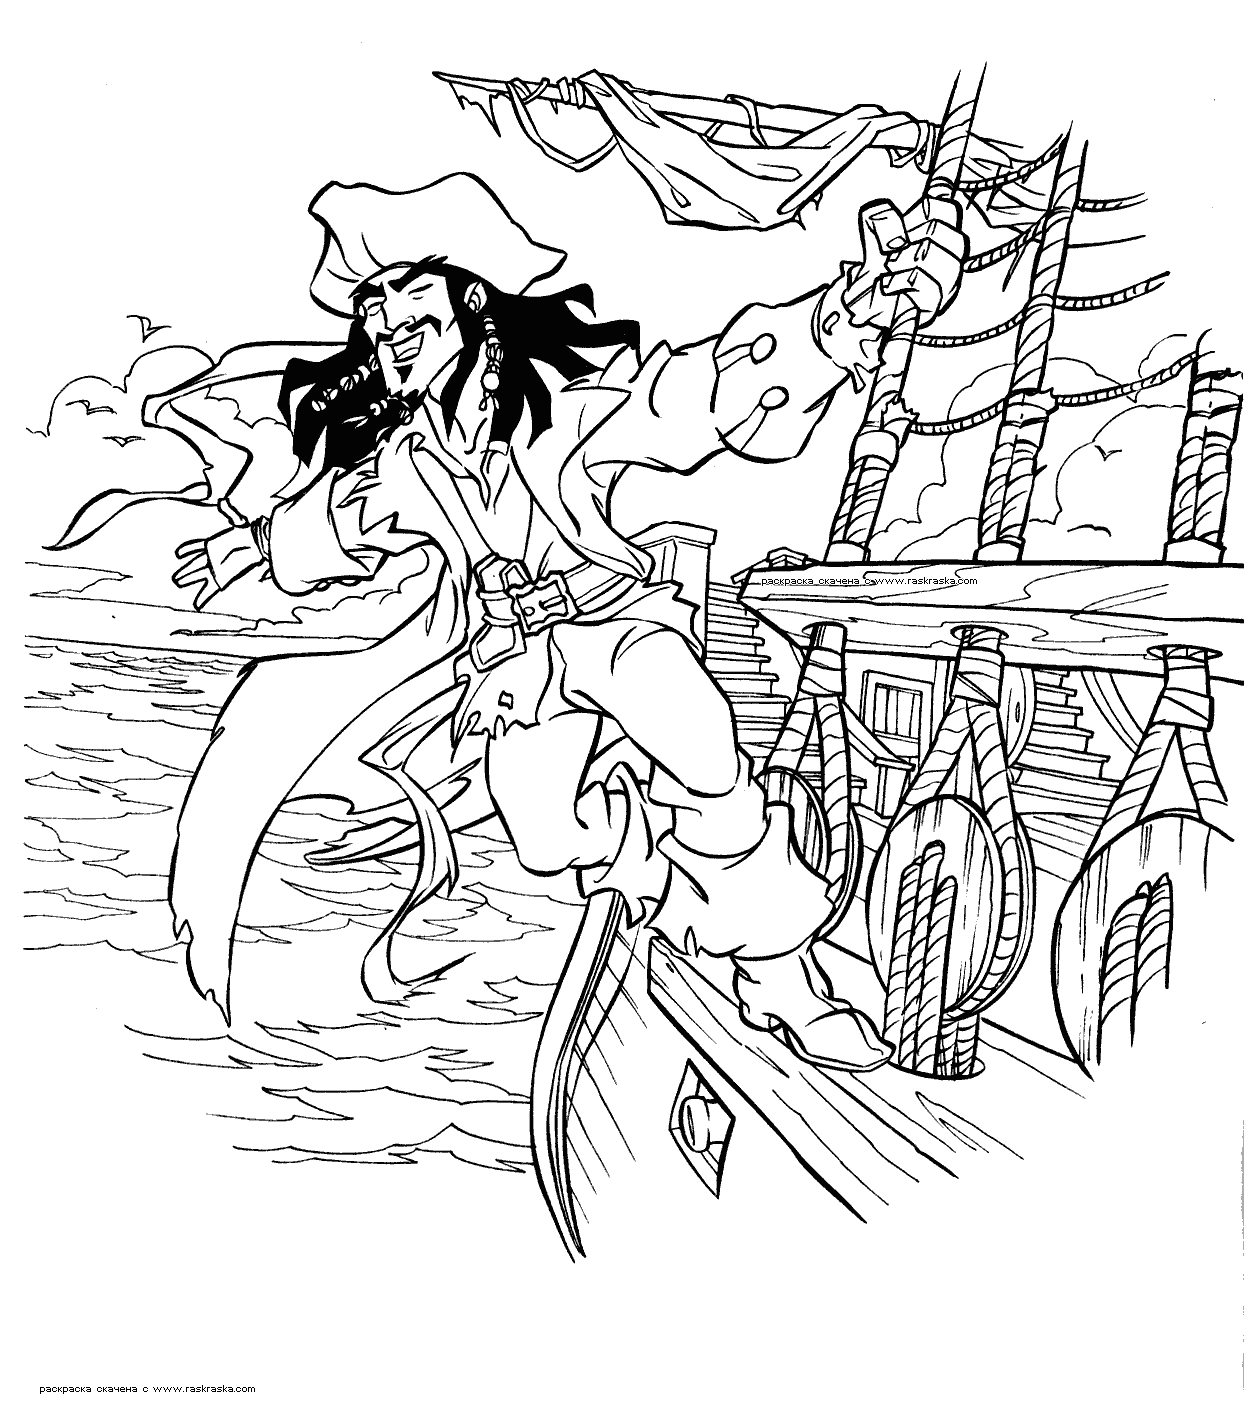 Pirate Coloring Pages For Kids Free Ace Images Pirate Coloring Pages Fairy Coloring P